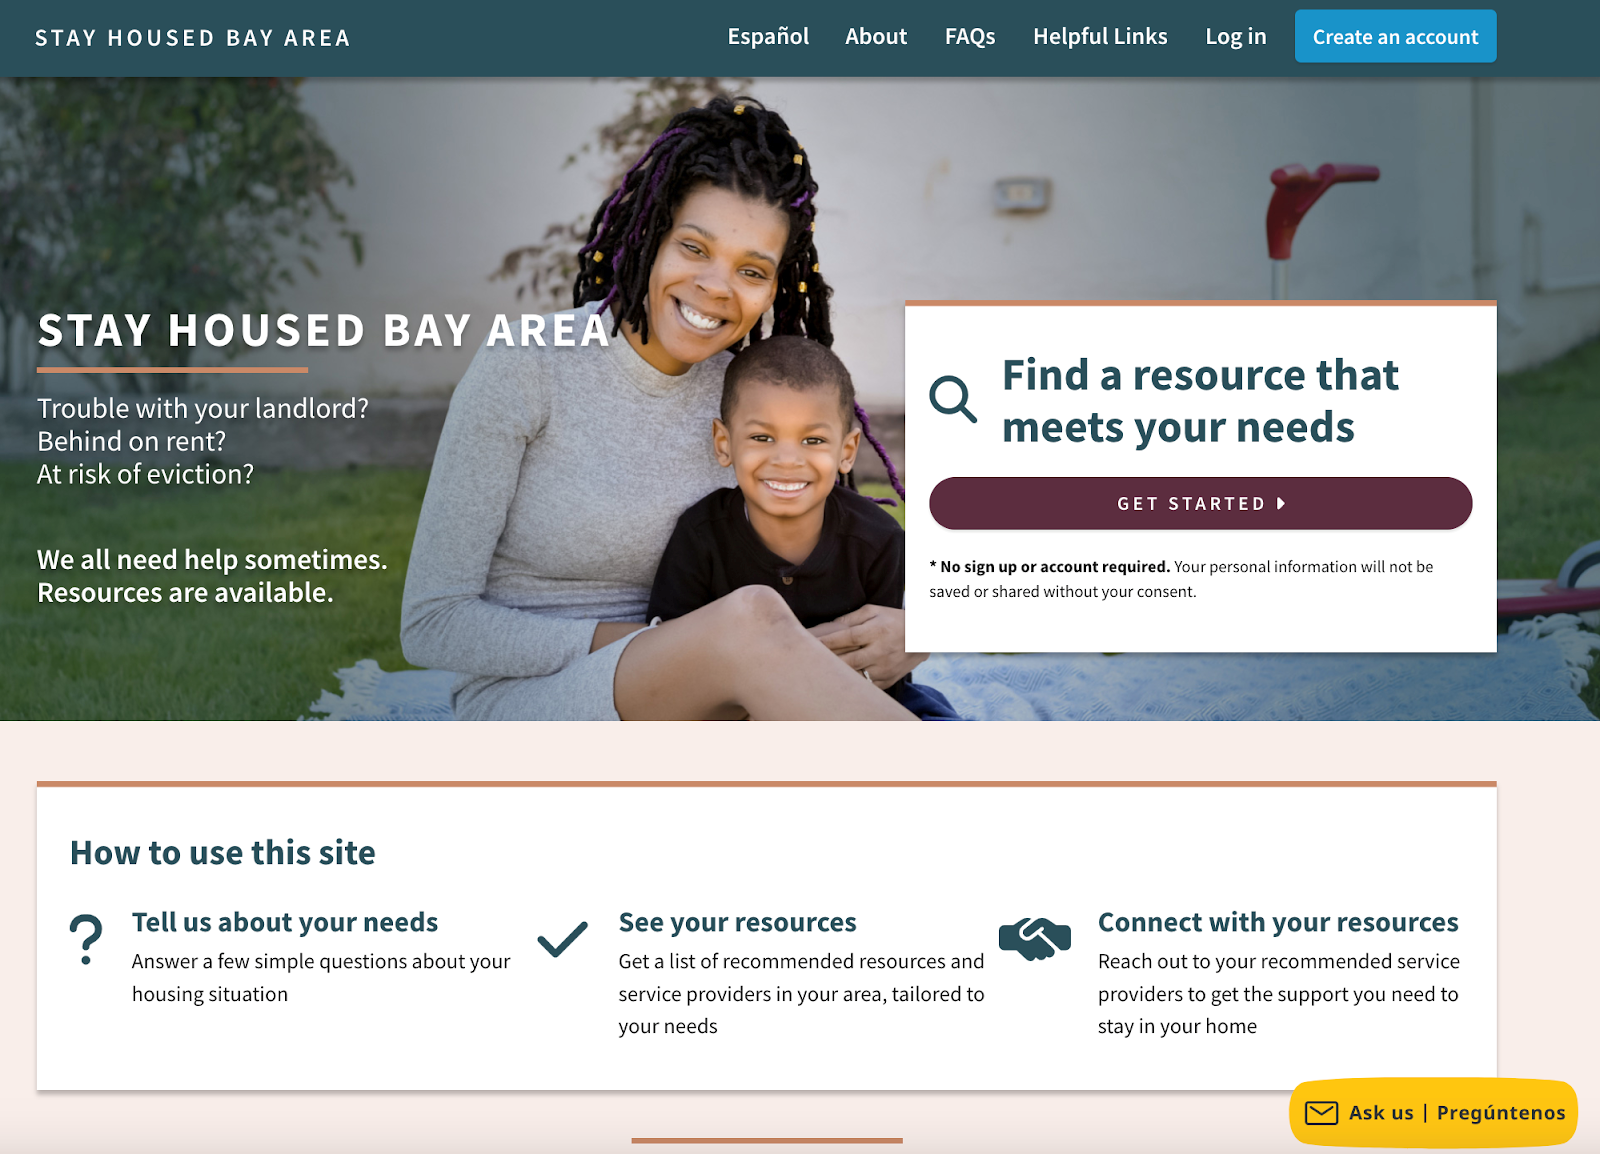 Introducing Stay Housed Bay Area: First Regional Platform to Keep Bay Area Residents Housed